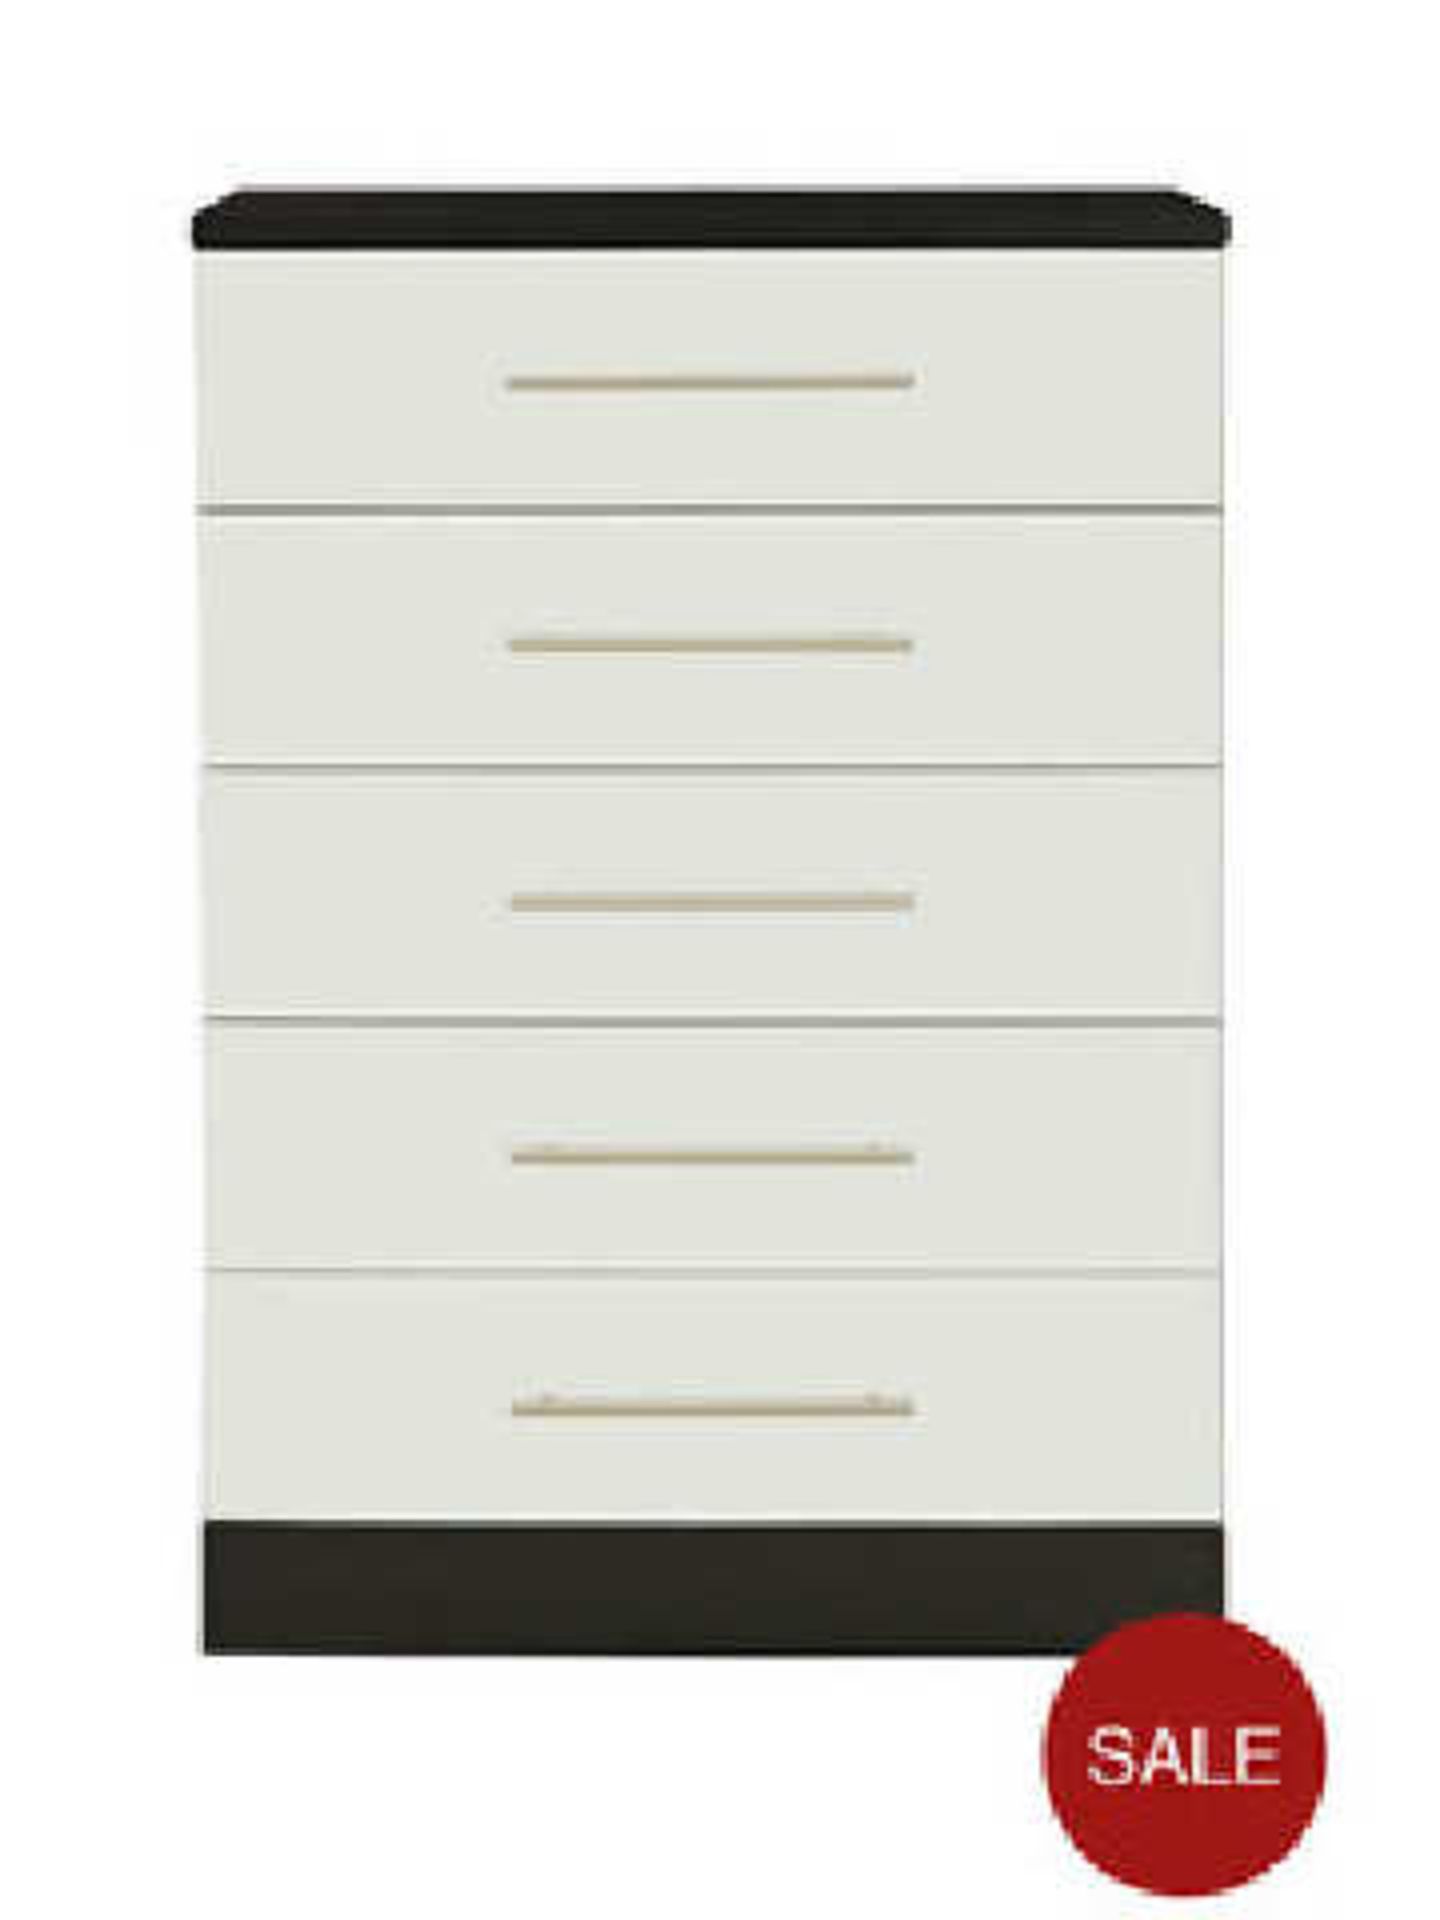 BOXED COLOGNE WHITE/BLACK GLOSS 5 DRAWER CHEST RRP £309